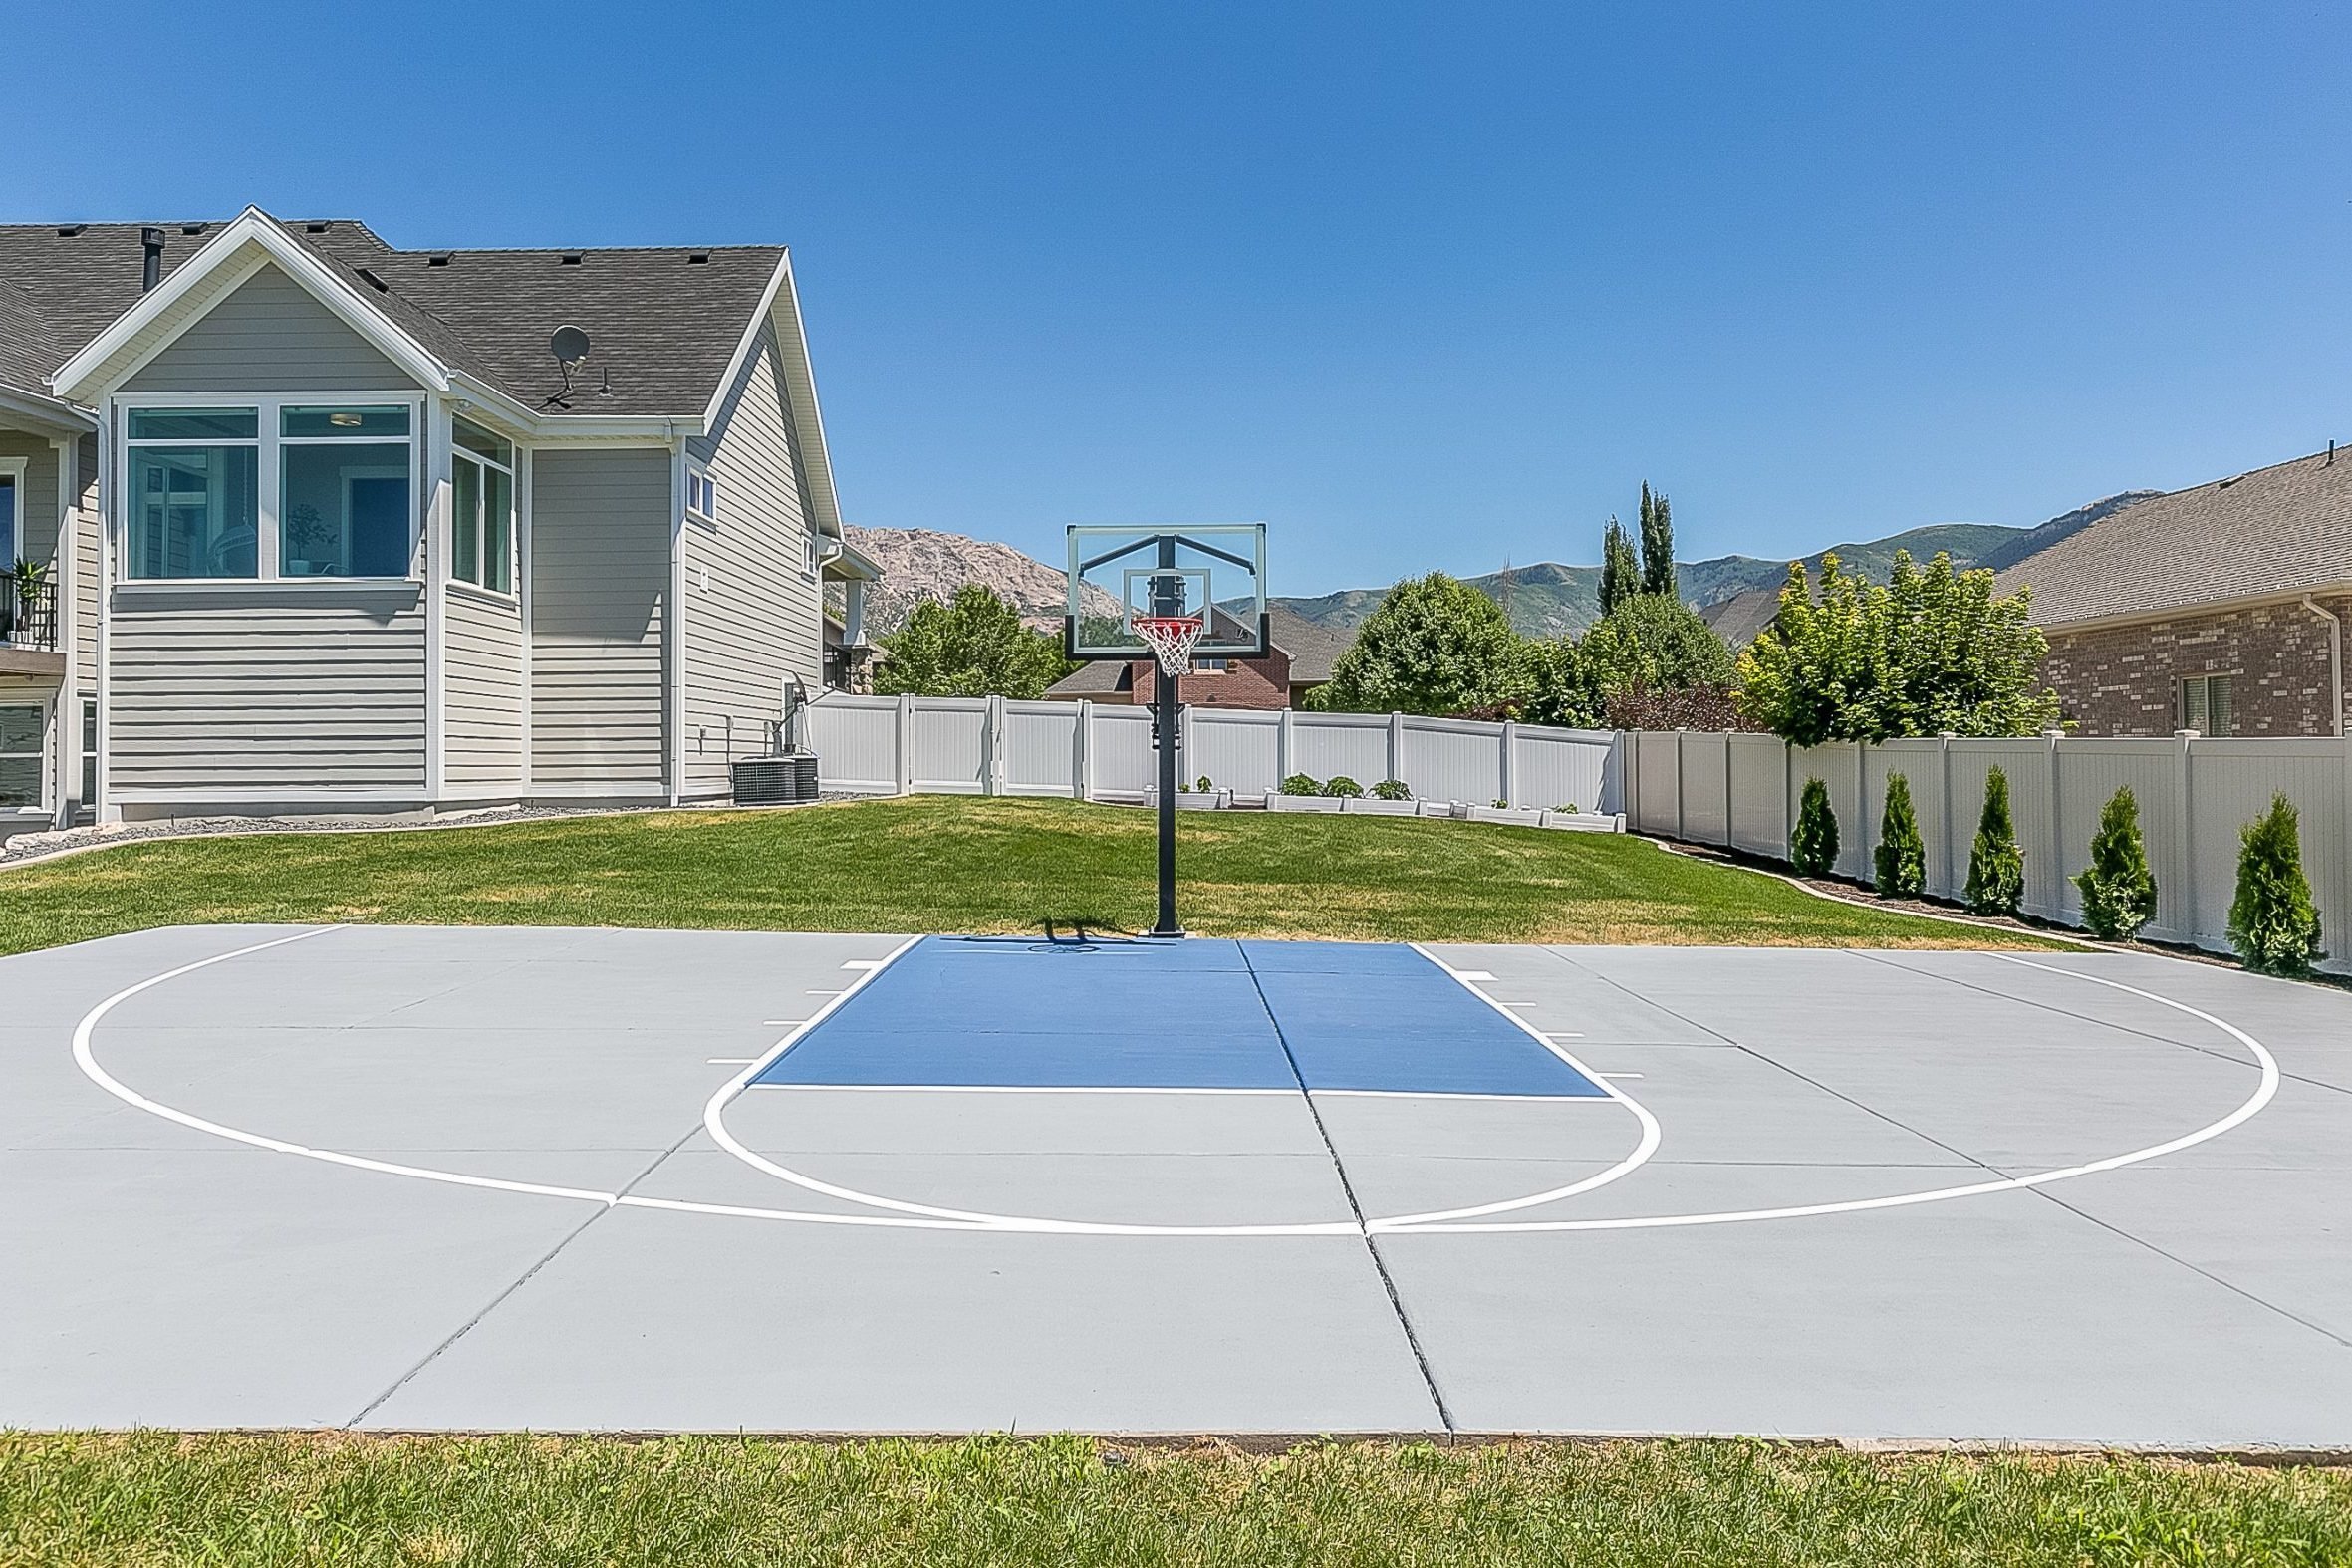 Basketball court dimensions guidelines for installation projects - Sports  Venue Calculator